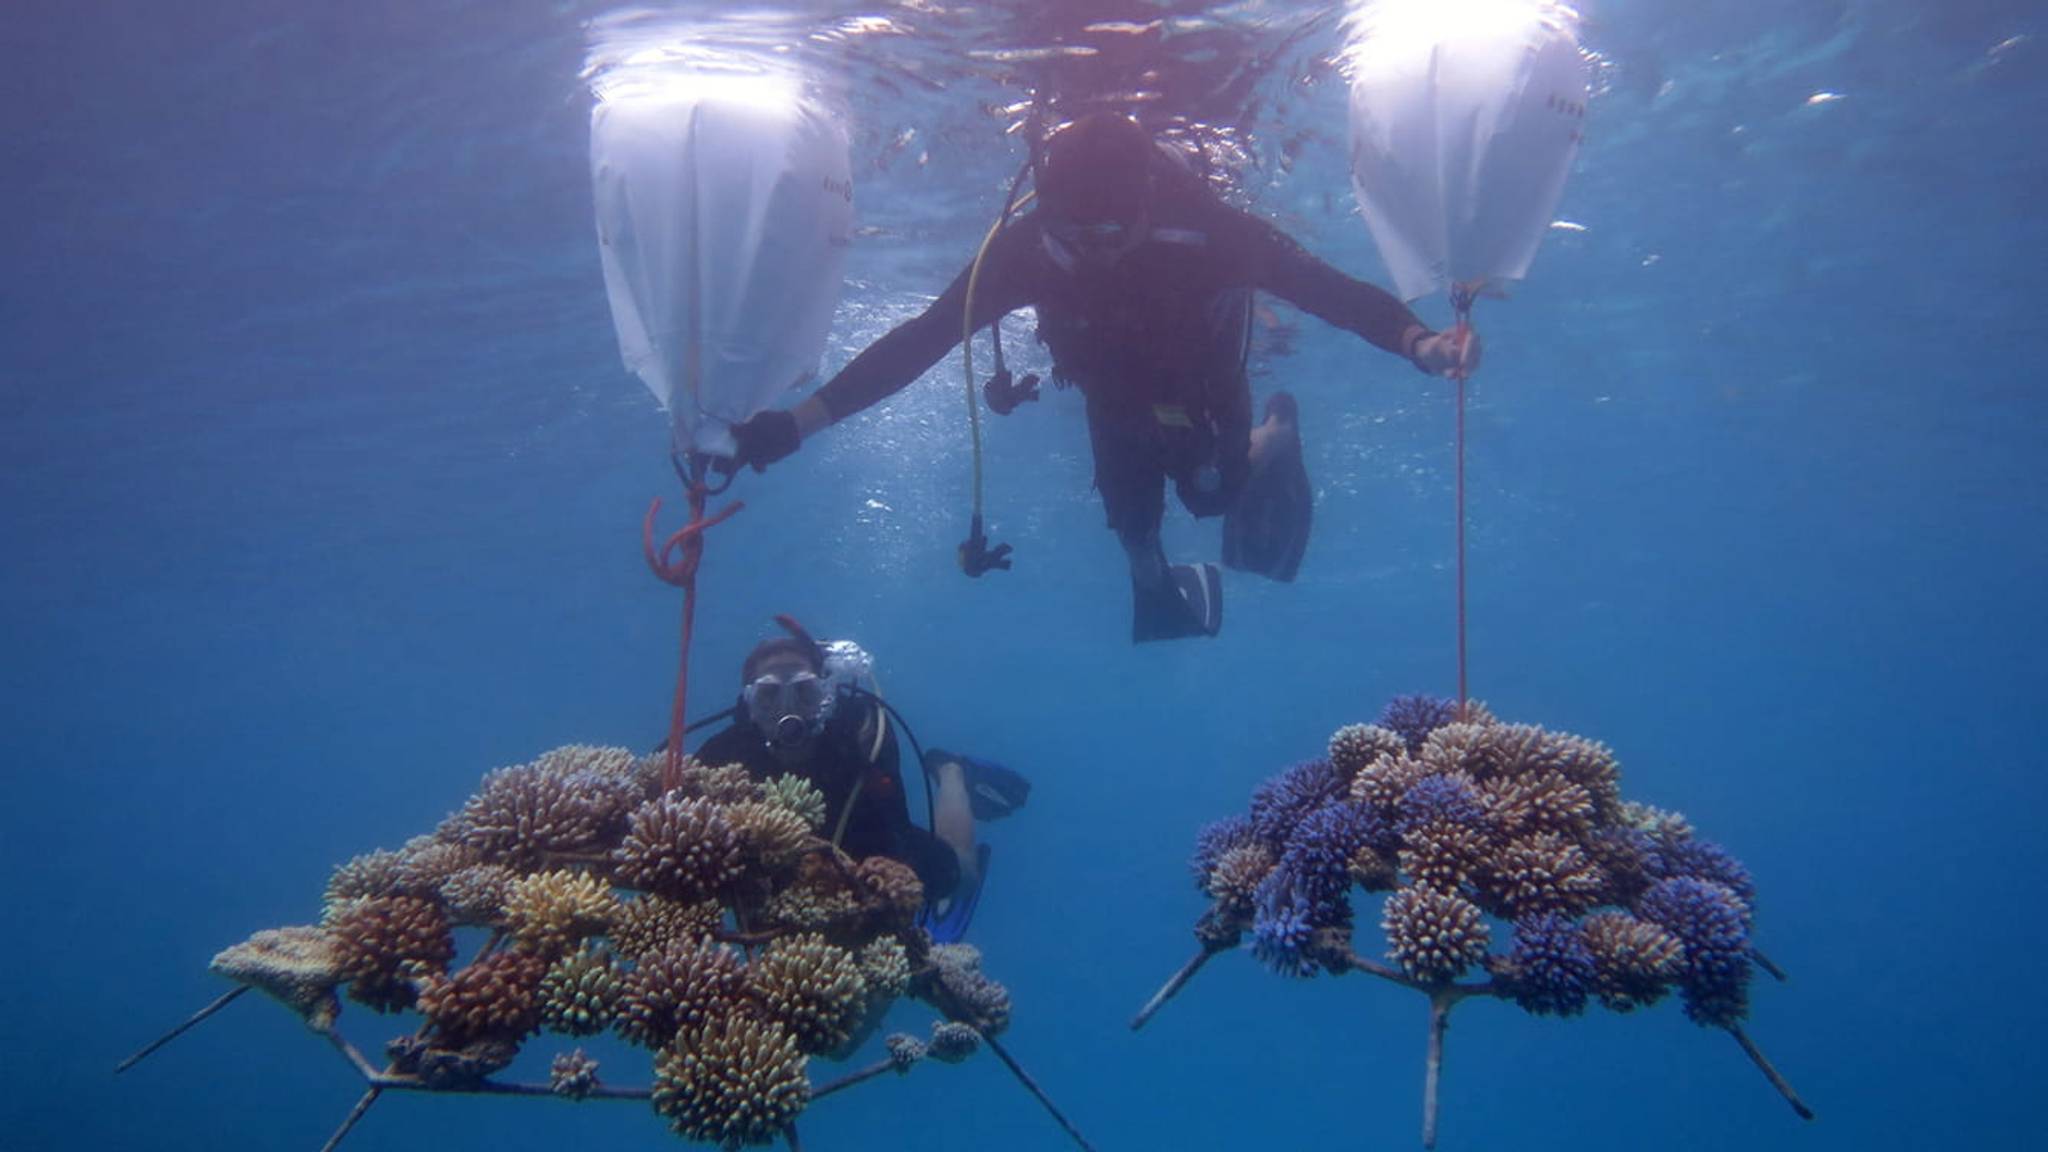 Maldives Four Seasons becomes a base for coral research